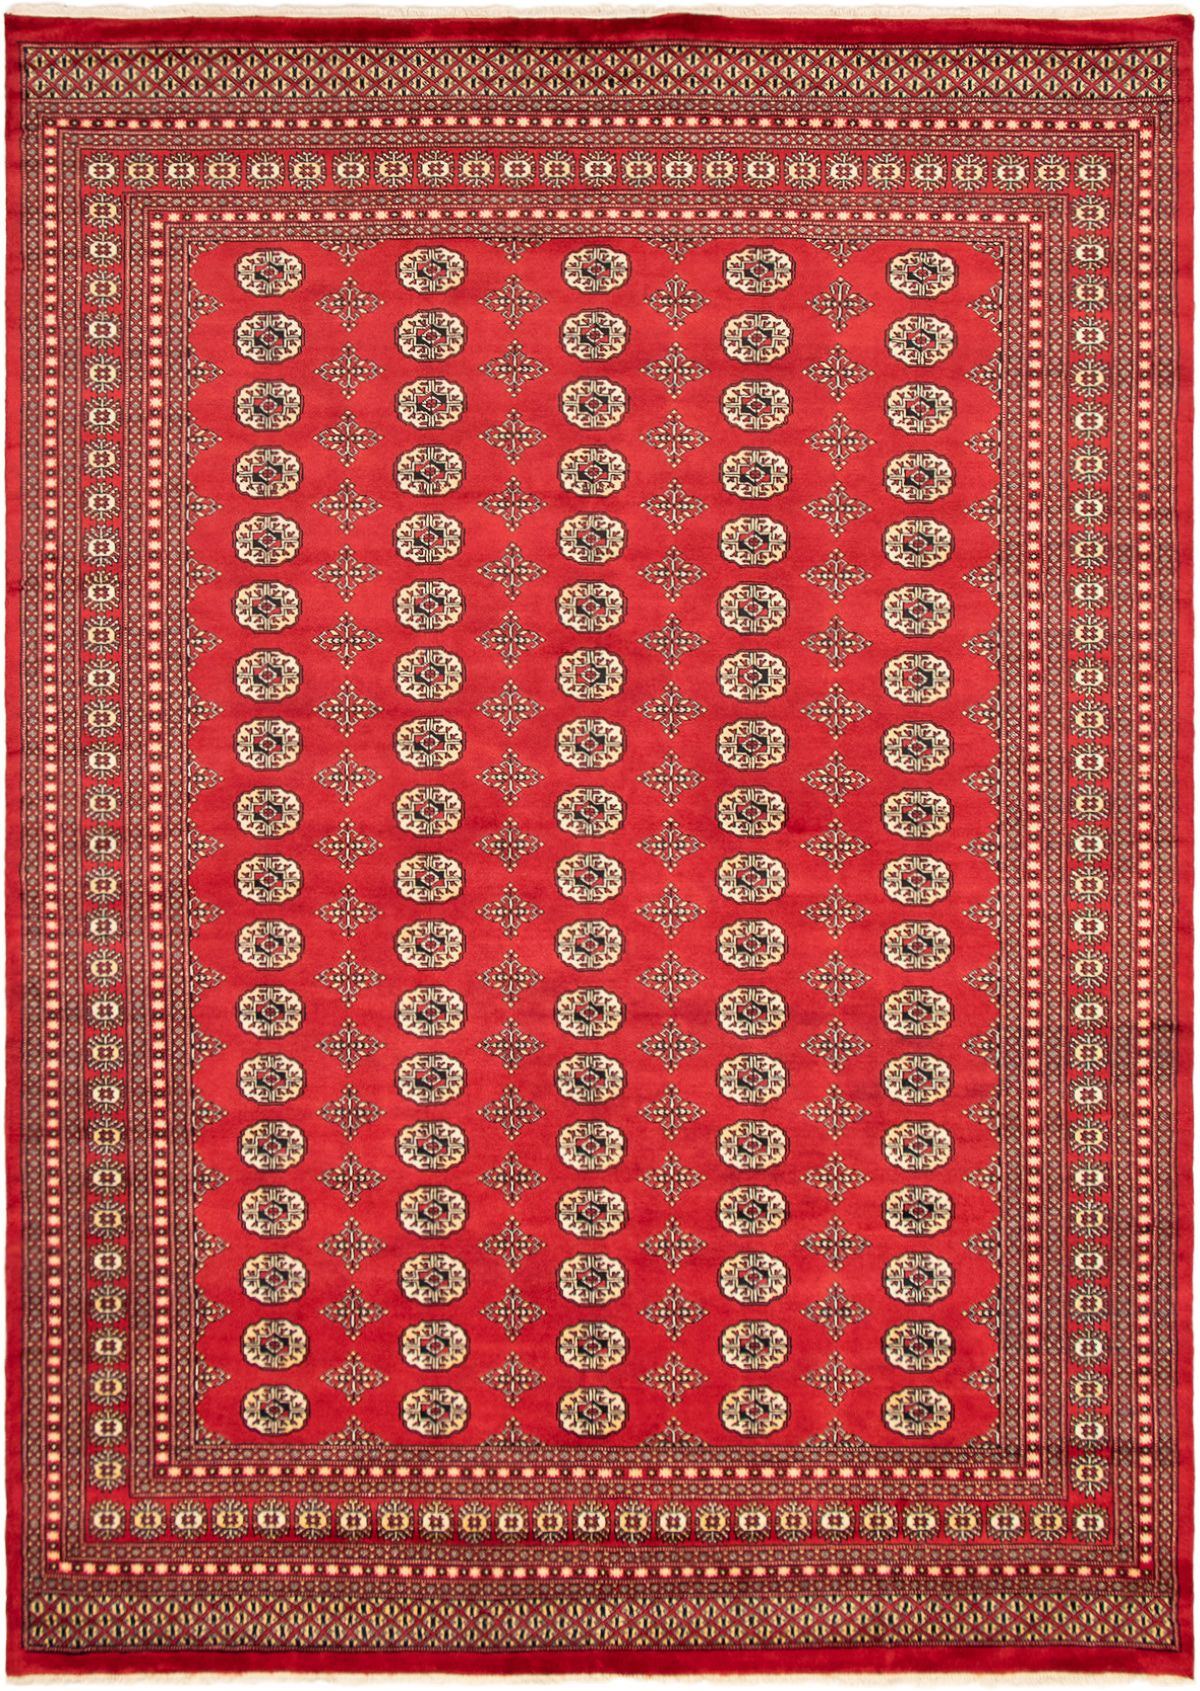 Hand-knotted Finest Peshawar Bokhara Red Wool Rug 9'1" x 12'1" Size: 9'1" x 12'1"  